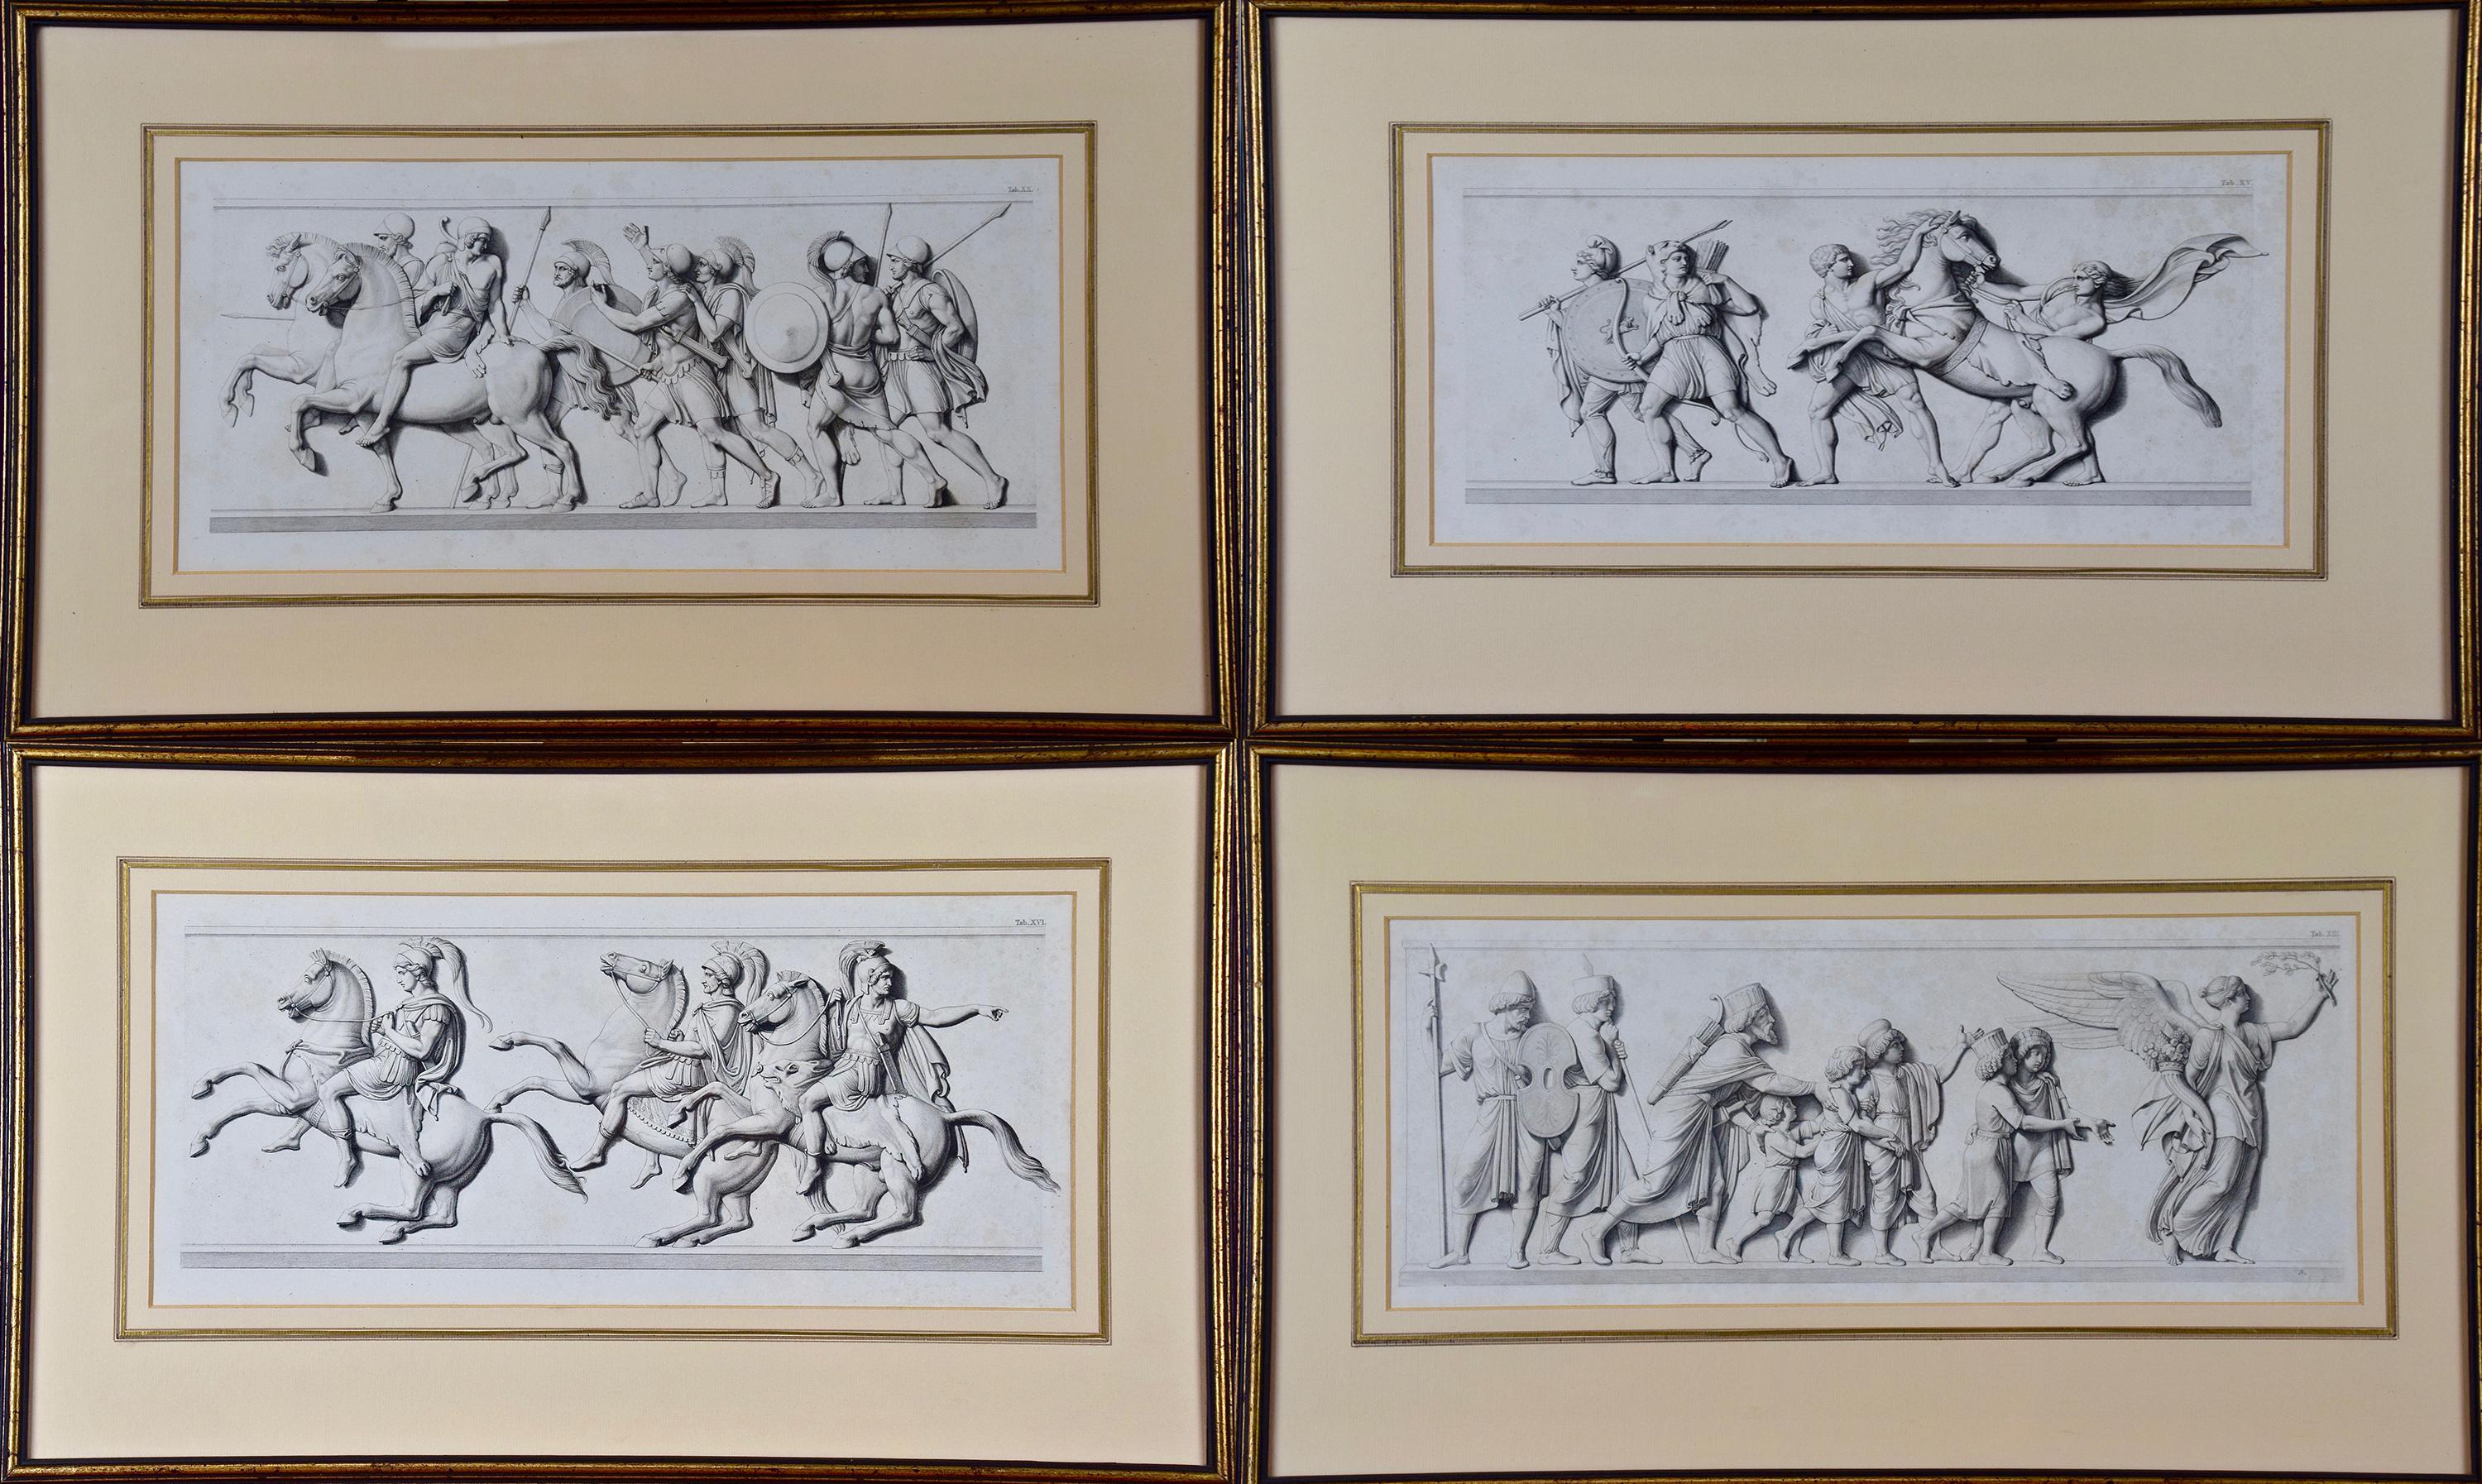 Unknown Portrait Print - A Set of Four Engravings of Processions of Roman or Greek Soldiers and Citizens